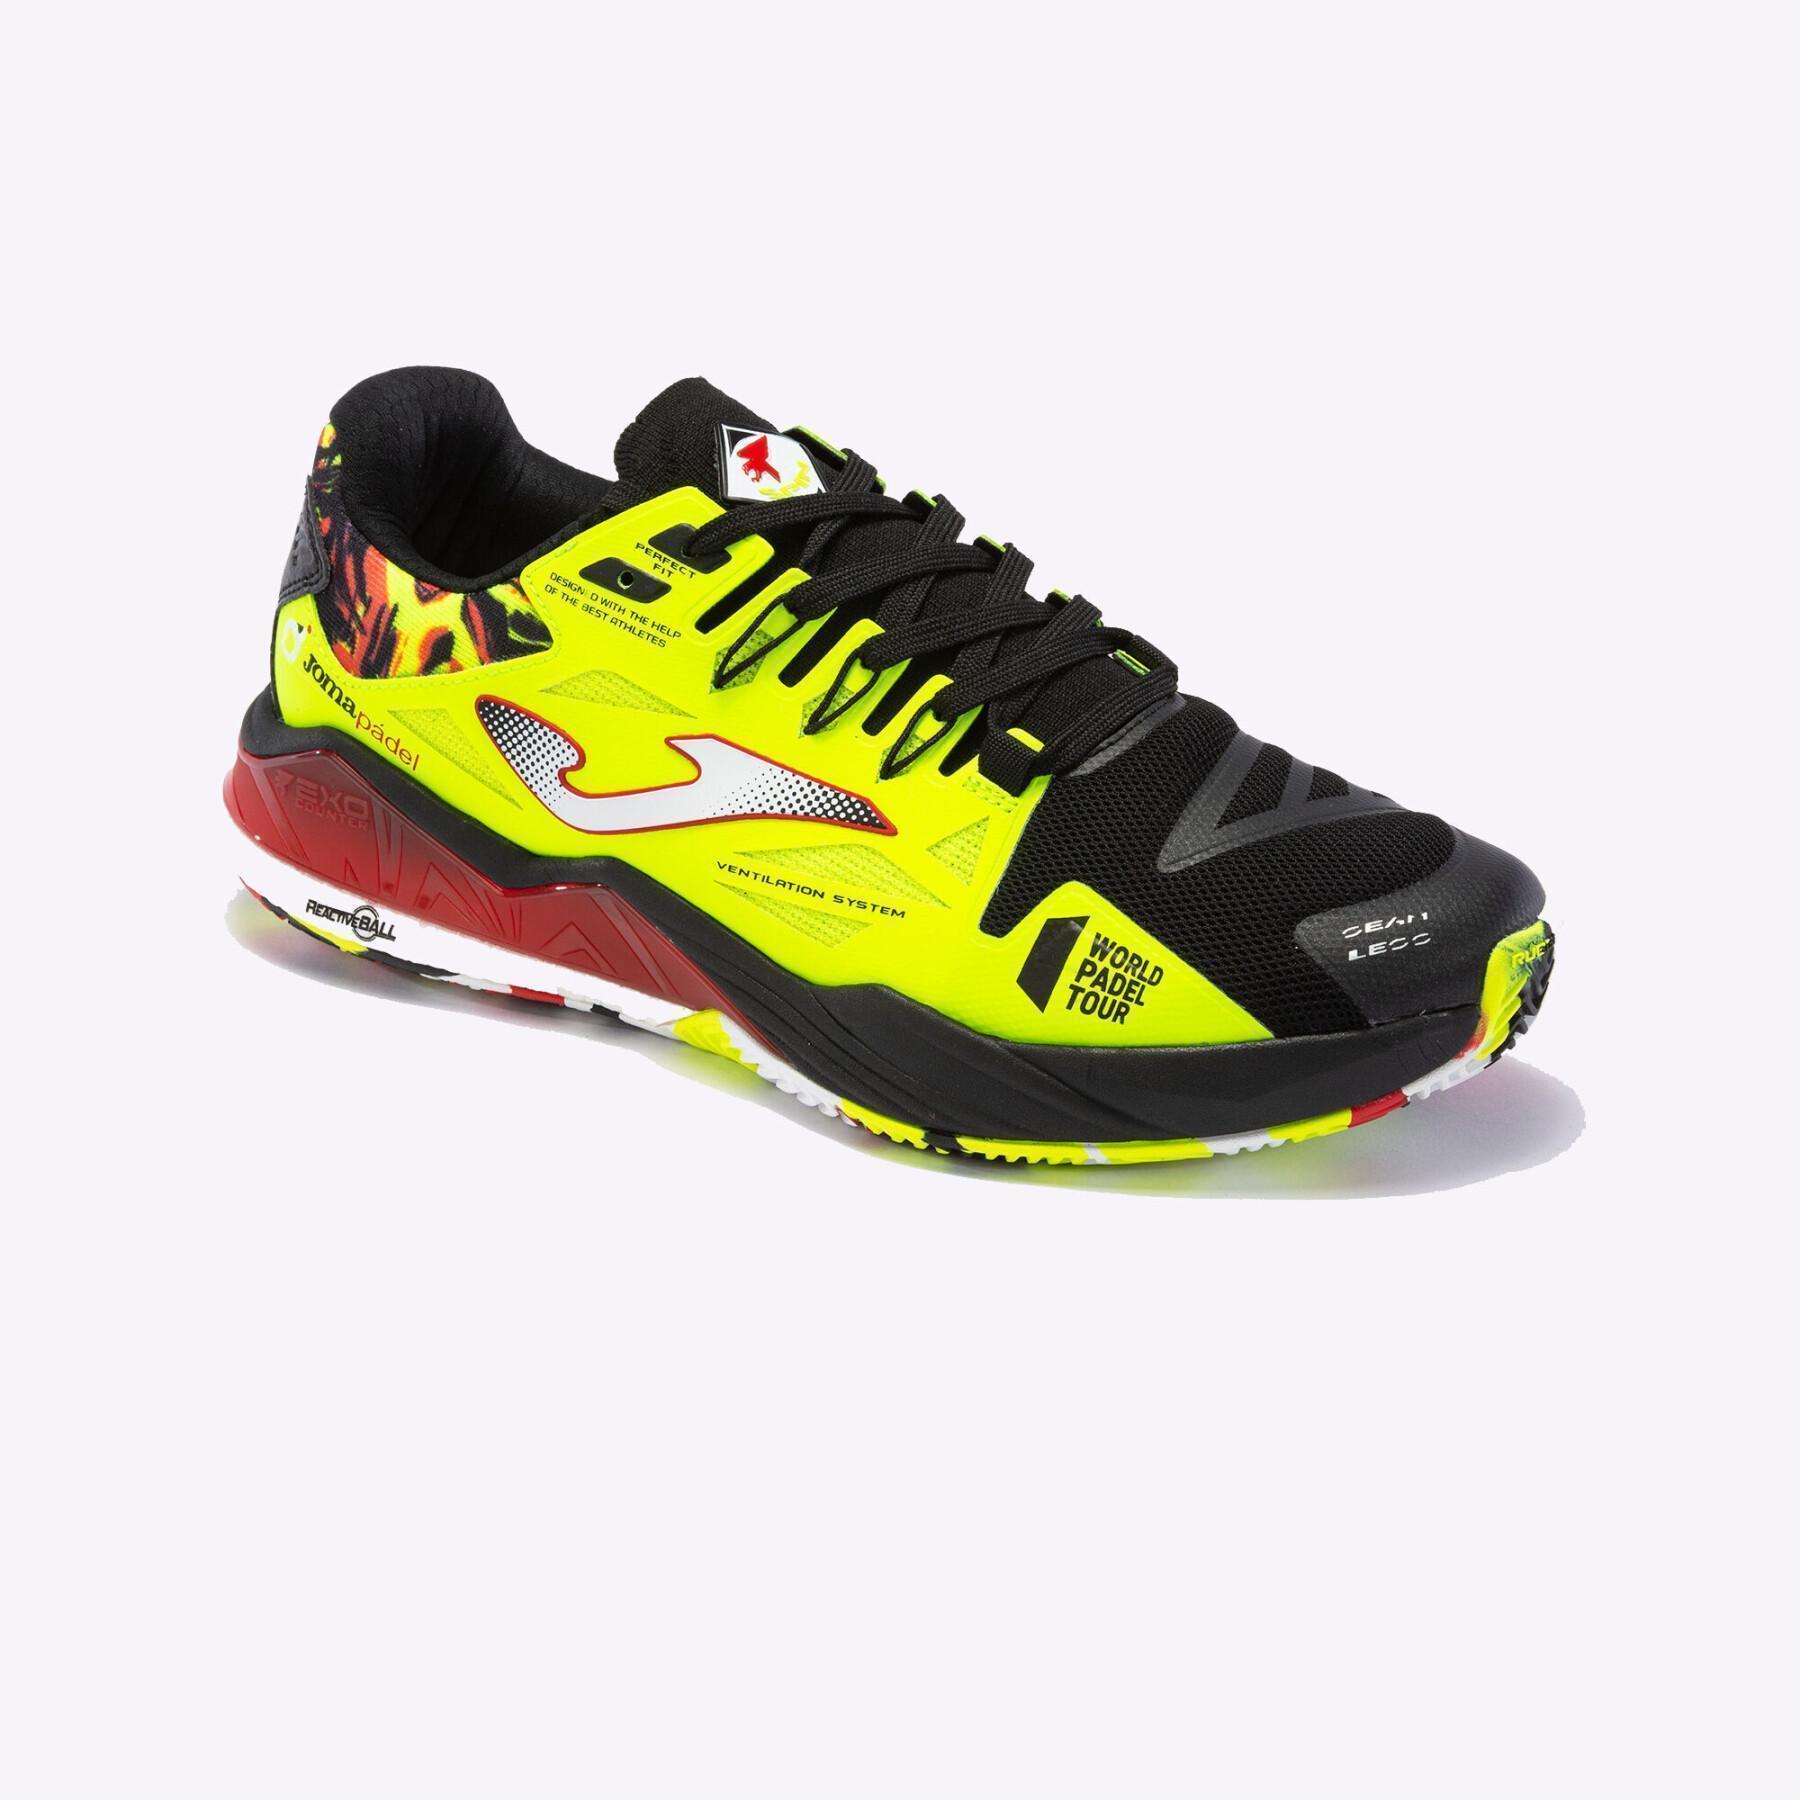 Padel-Schuhe Joma T.Spin 2309